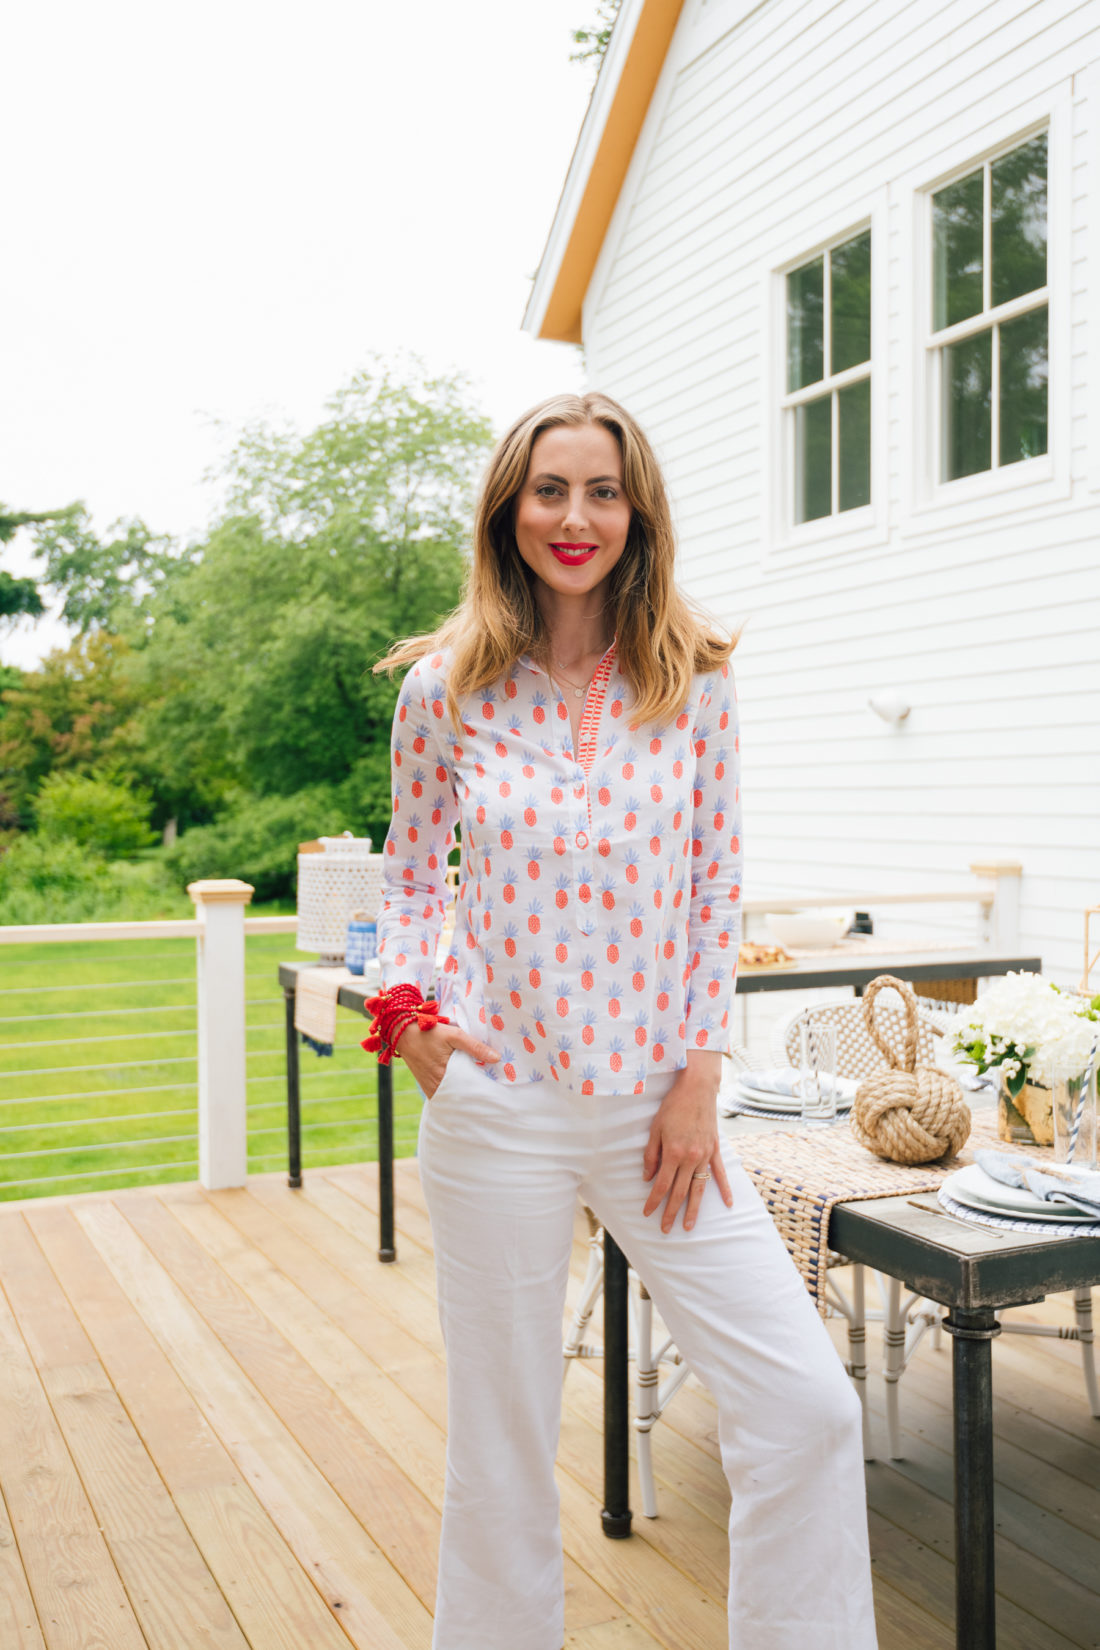 Eva Amurri Martino shows you how to throw a clambake (and hold a lobster)